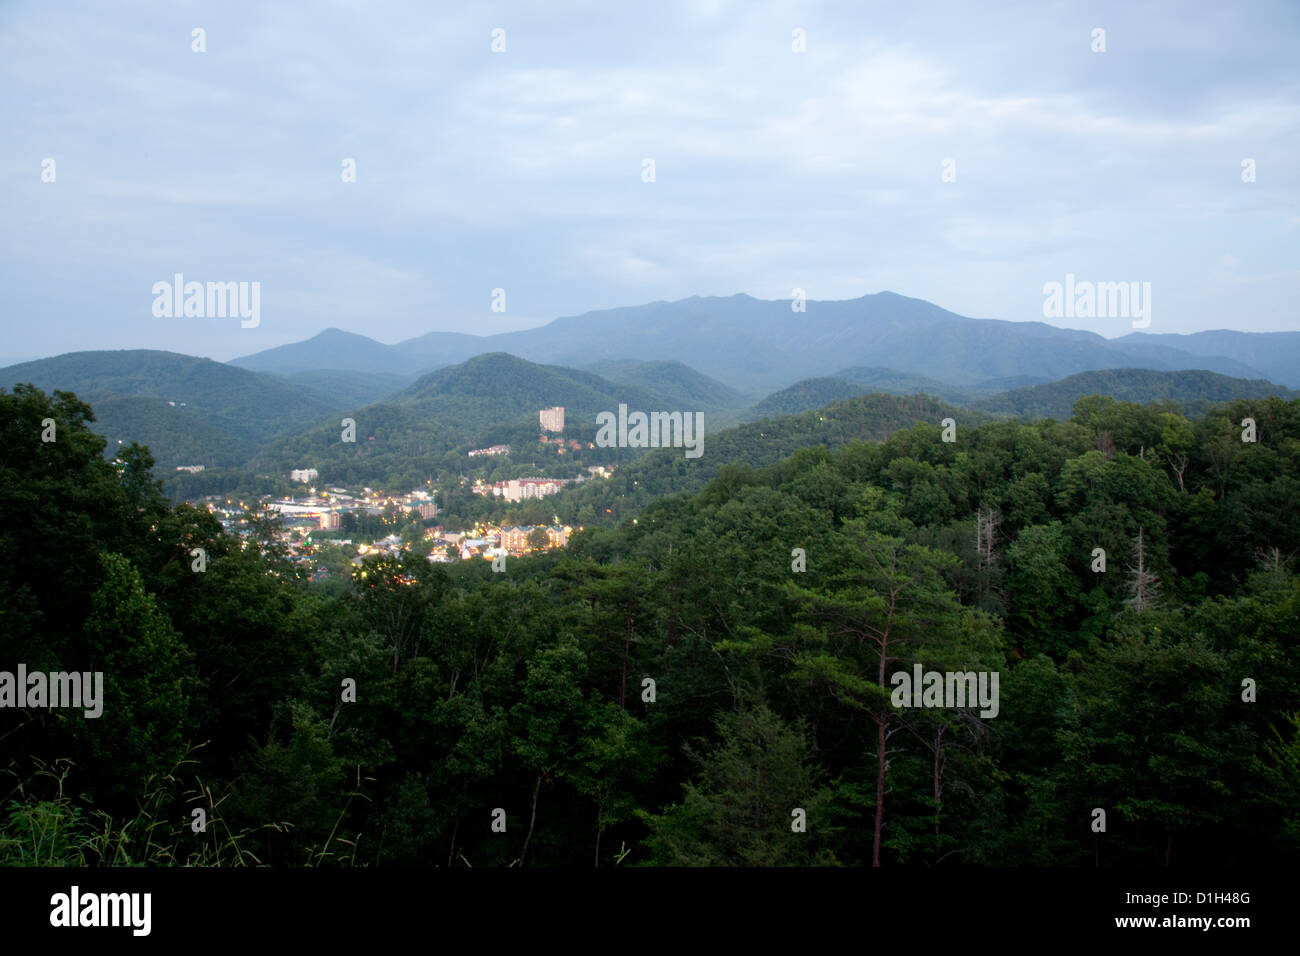 Gatlinburg, Tennessee, nestled in the Great Smoky Mountain National Park, of the SE USA Stock Photo